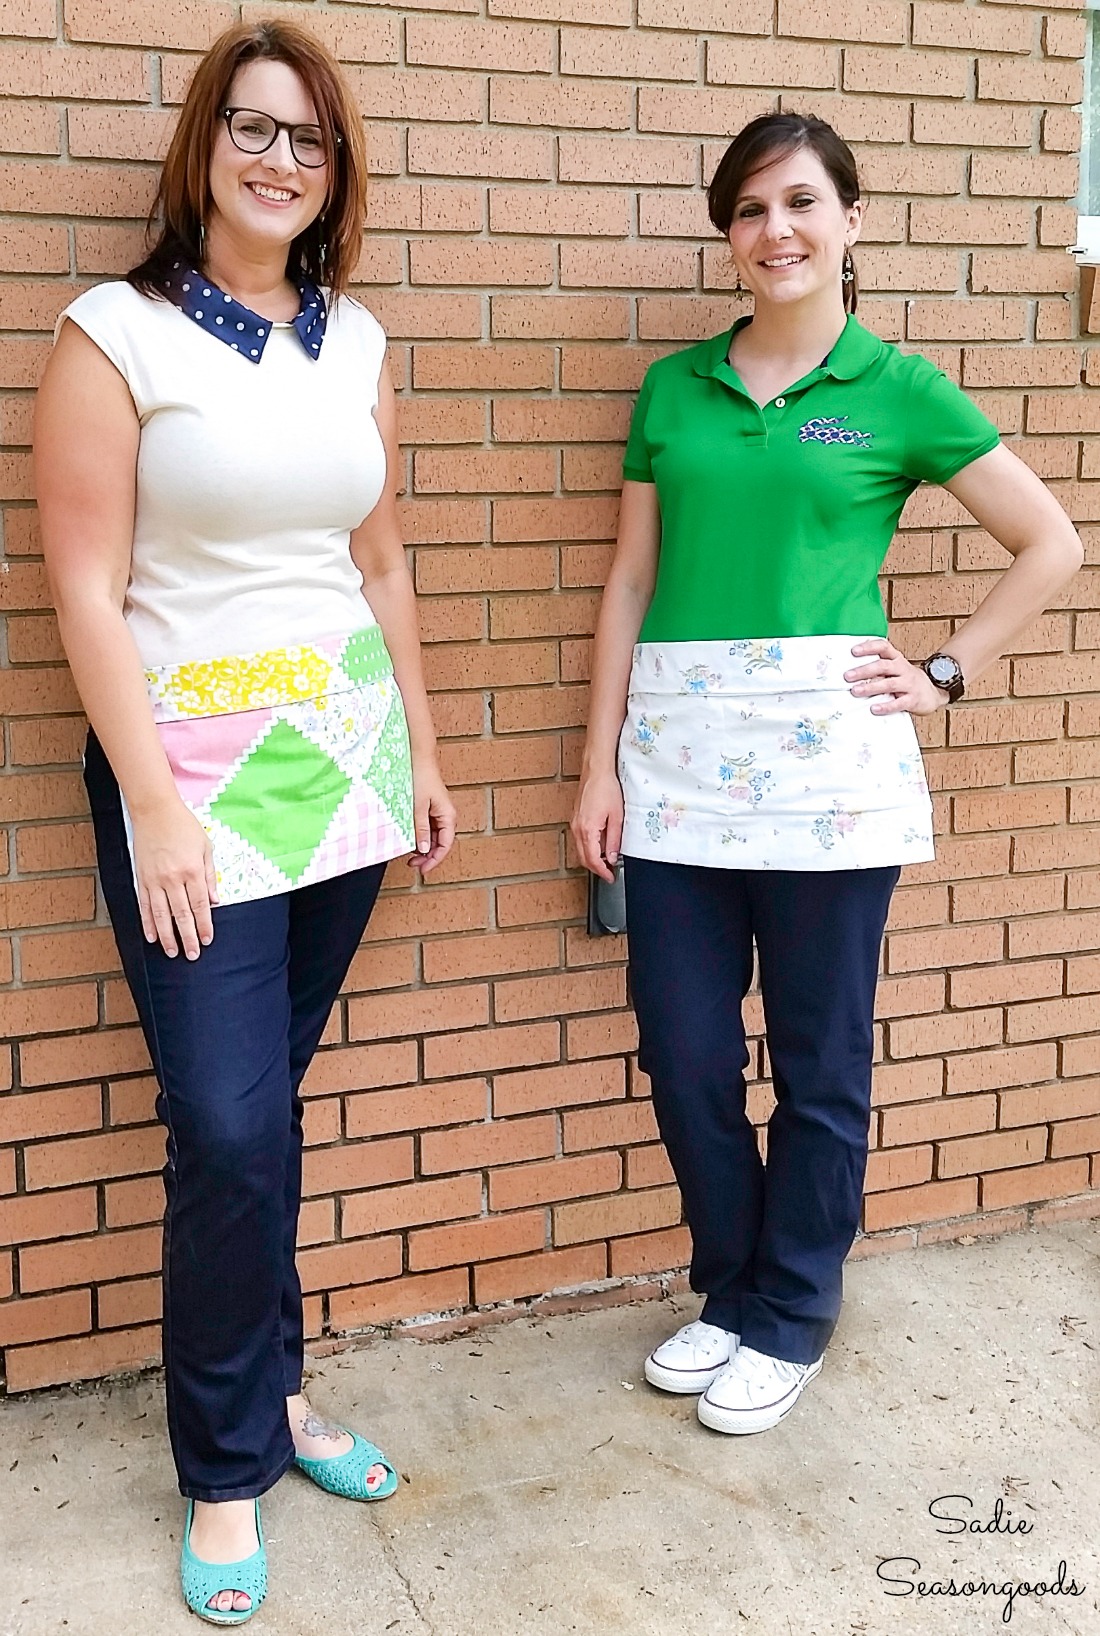 Vintage pillowcases as server aprons or waist aprons